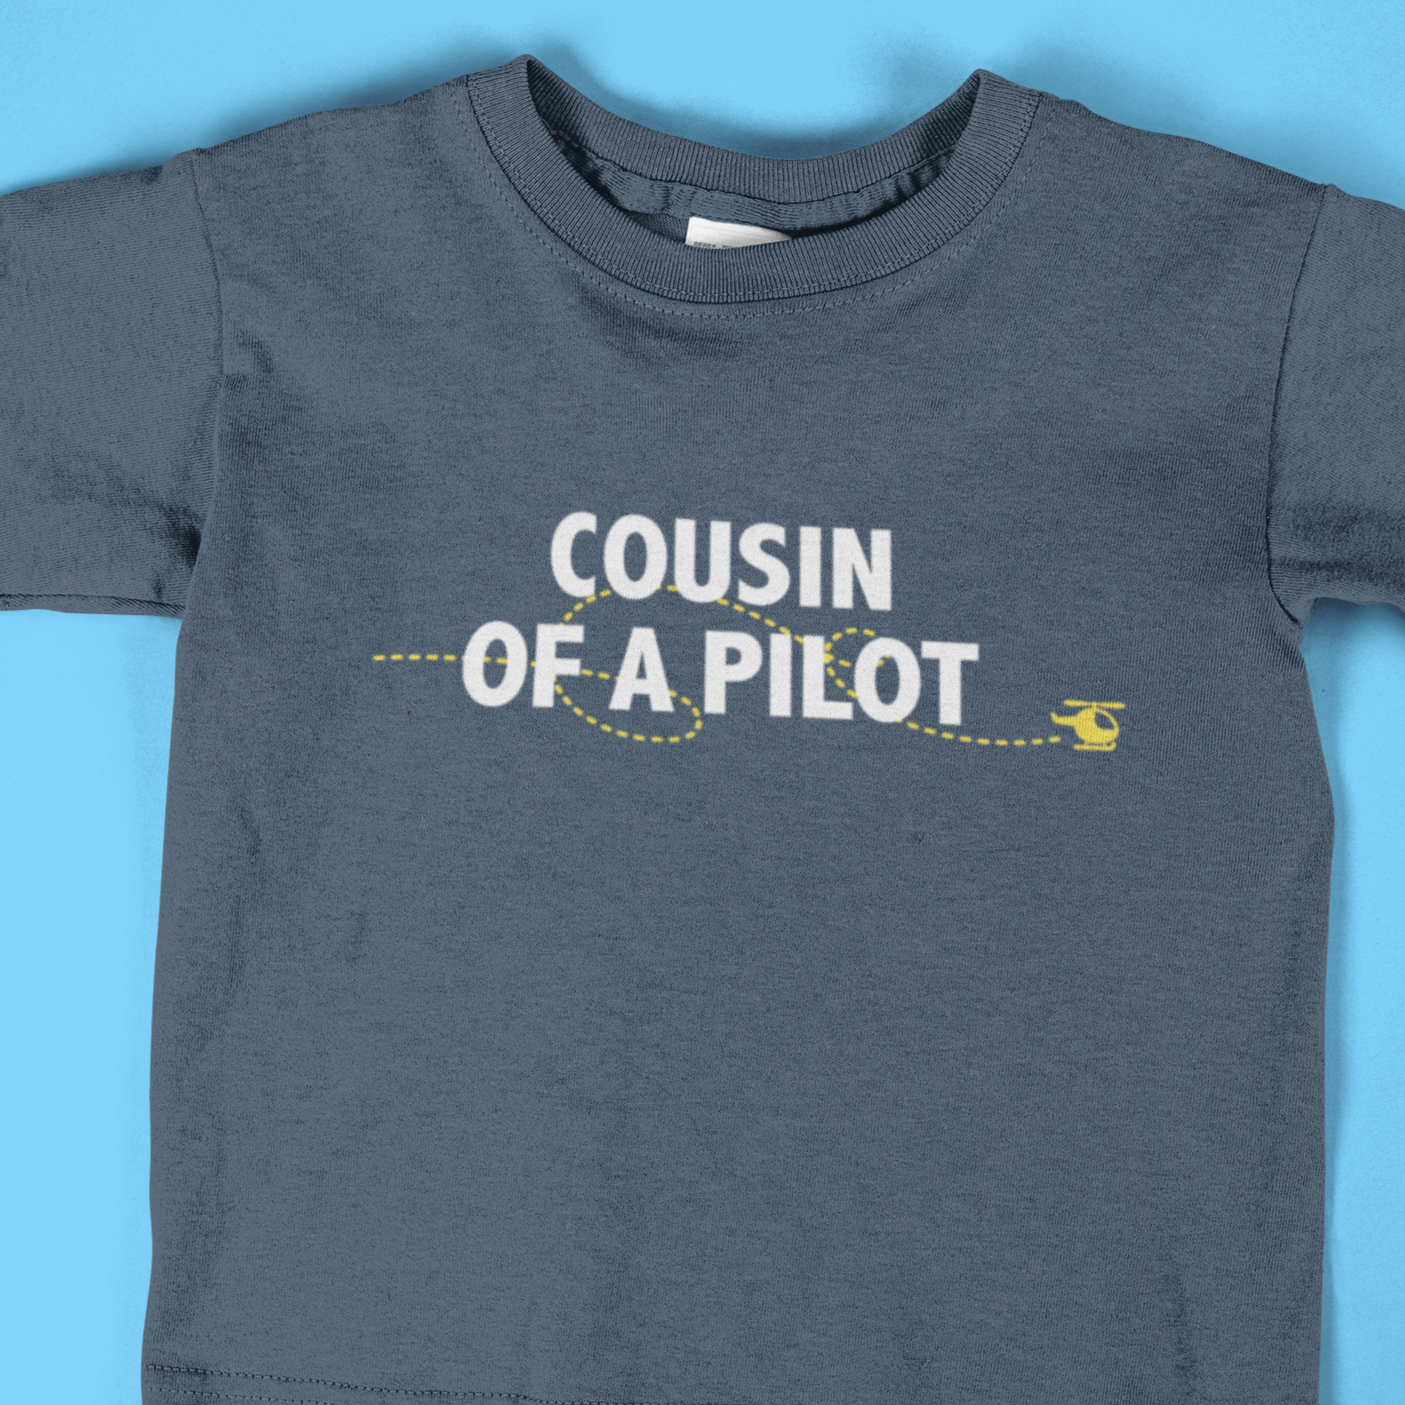 Cousin of the/a Pilot - Baby & Toddler T-shirts